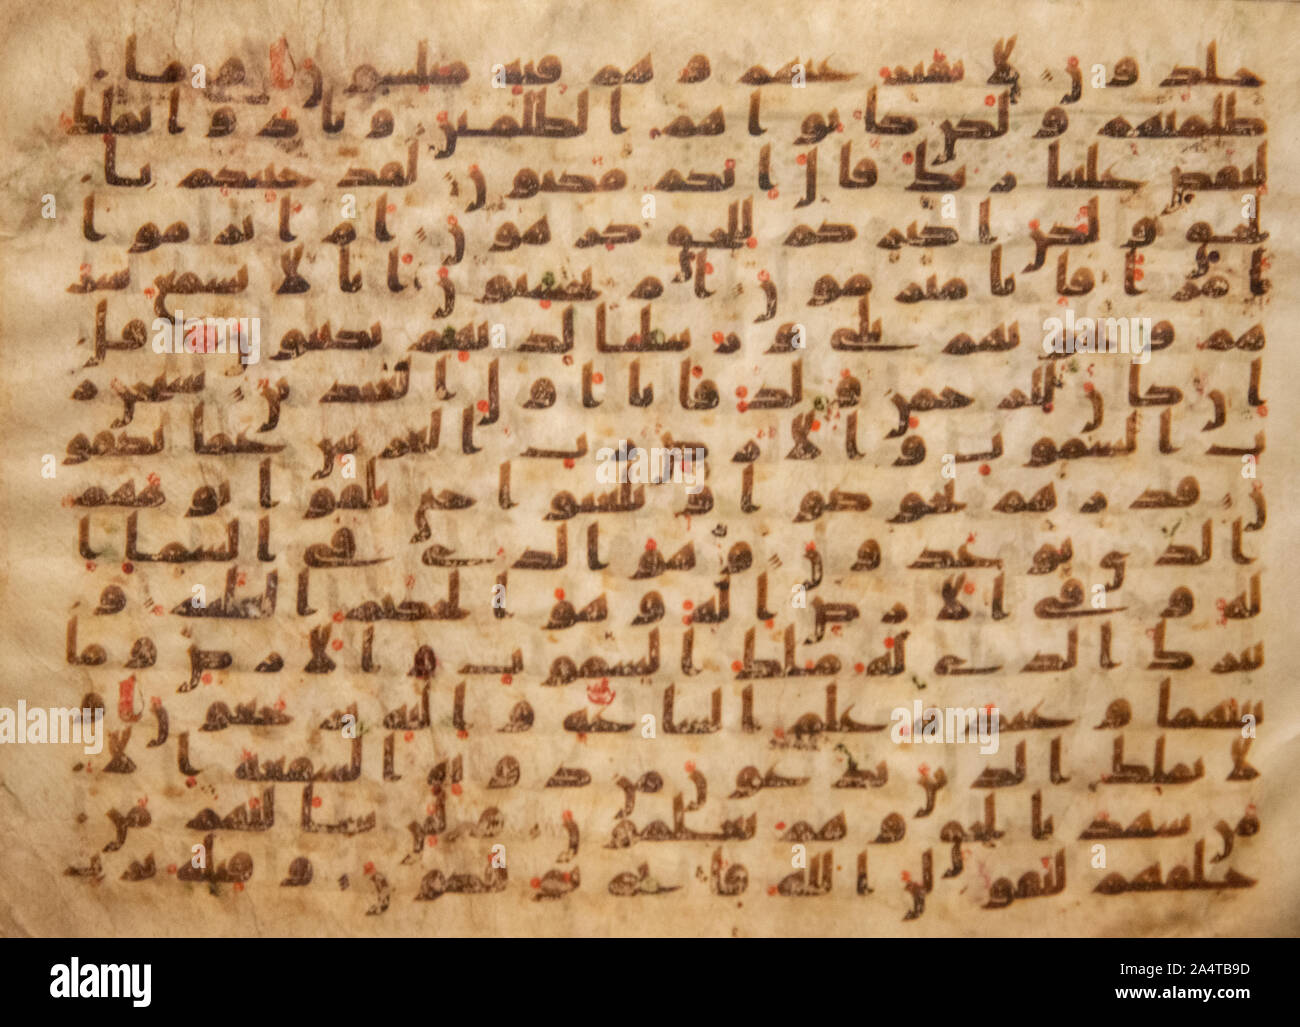 Old Koran page from 9th century written in kuffic language on animal skin, tropical museum in Amsterdam, Holland Stock Photo